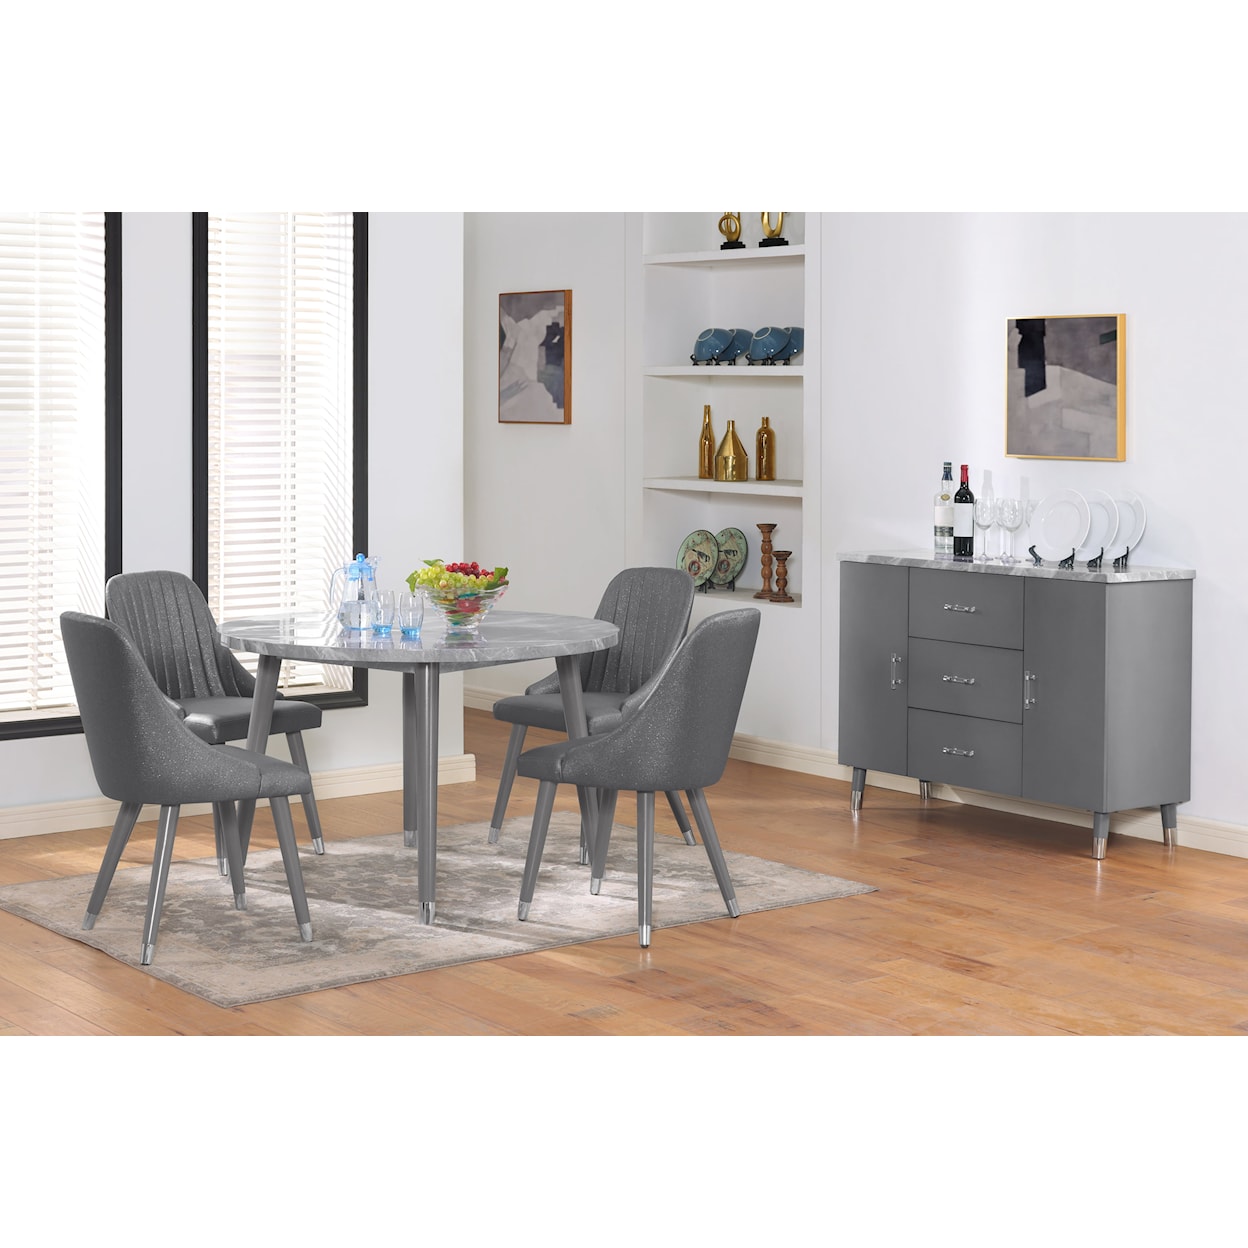 New Classic Furniture Mirage Dining Room Group